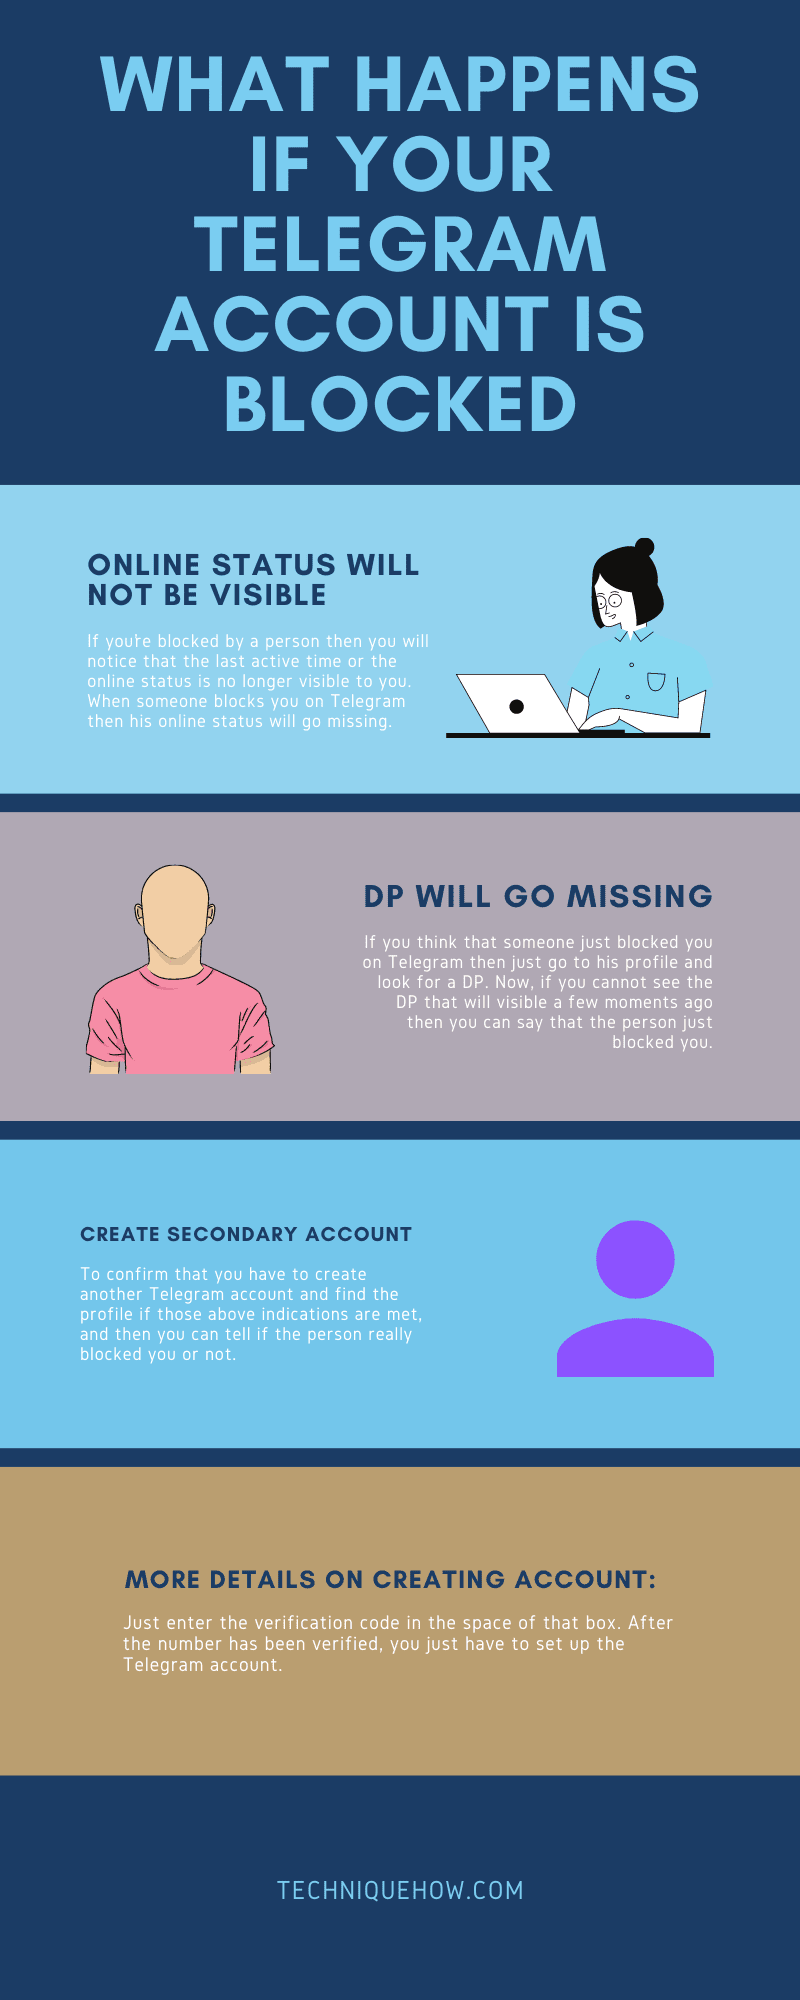 infographic_What Happens if your Telegram Account is Blocked